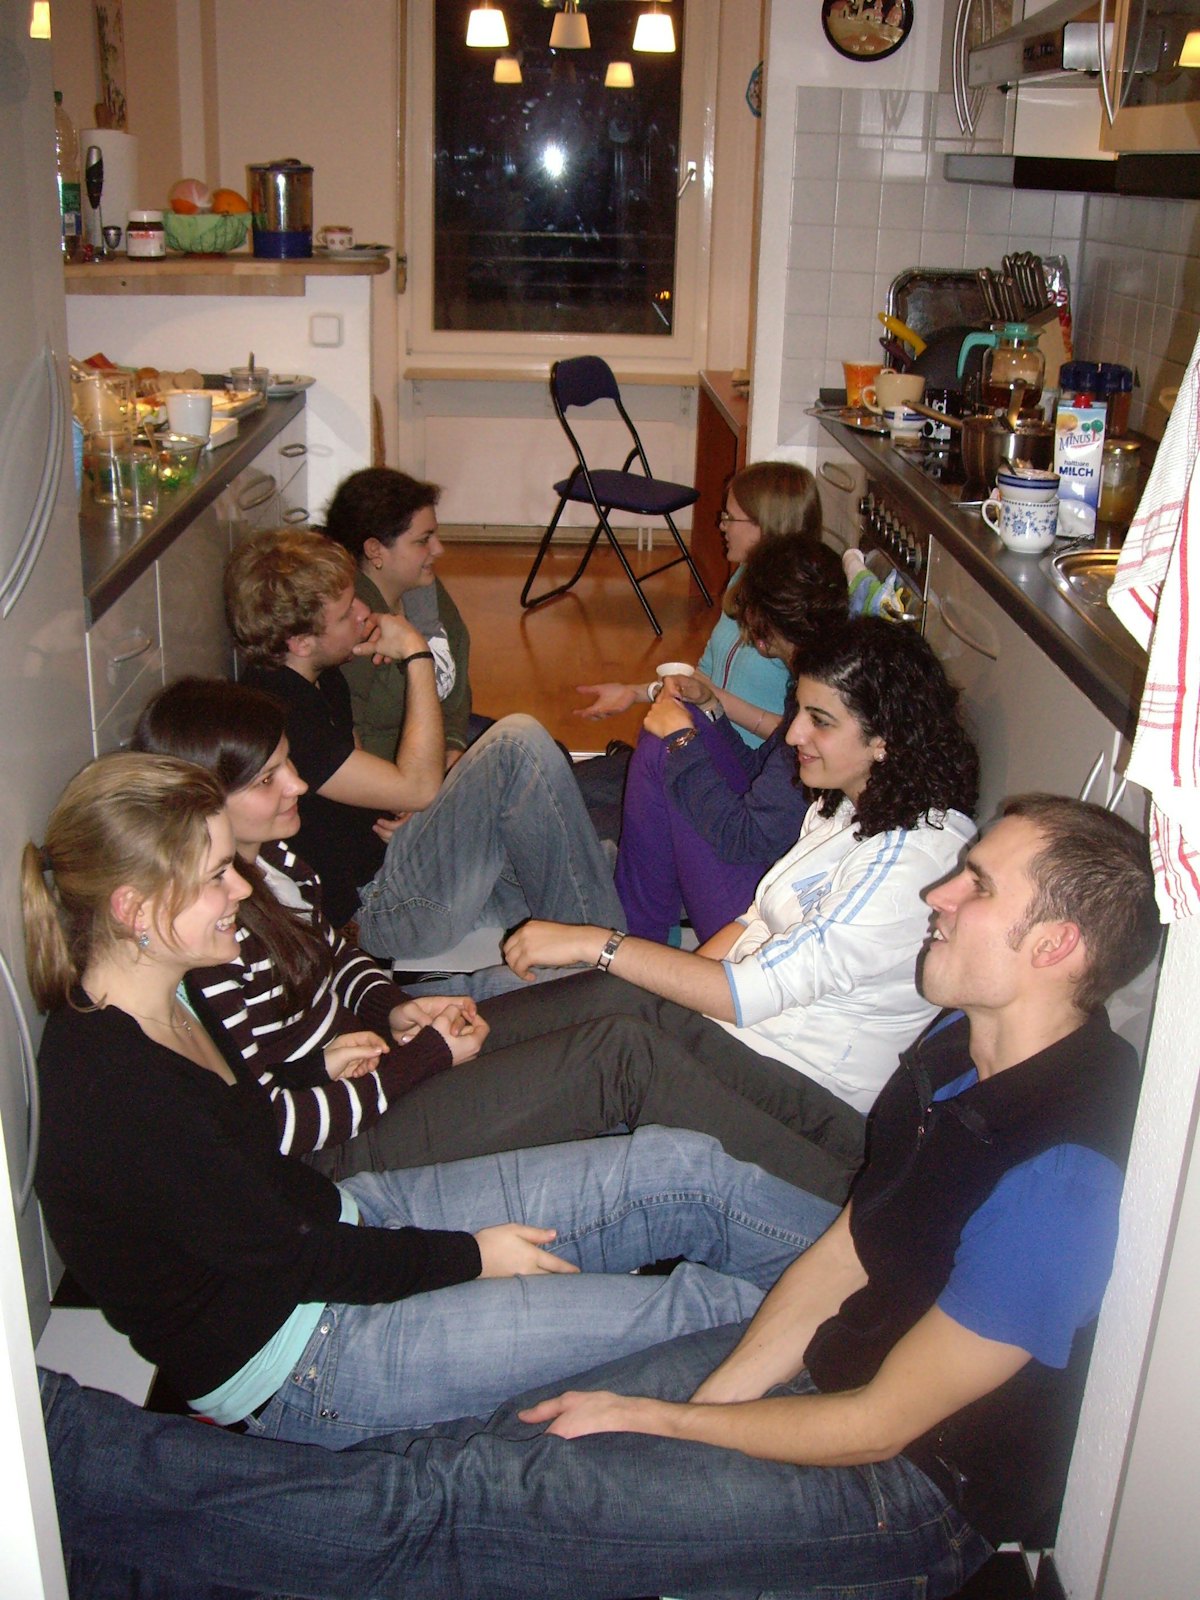 A dozen people gather every two weeks at a home in Heidelberg, Germany, for prayers, food, and conversation. Participants say they like the relaxed atmosphere.